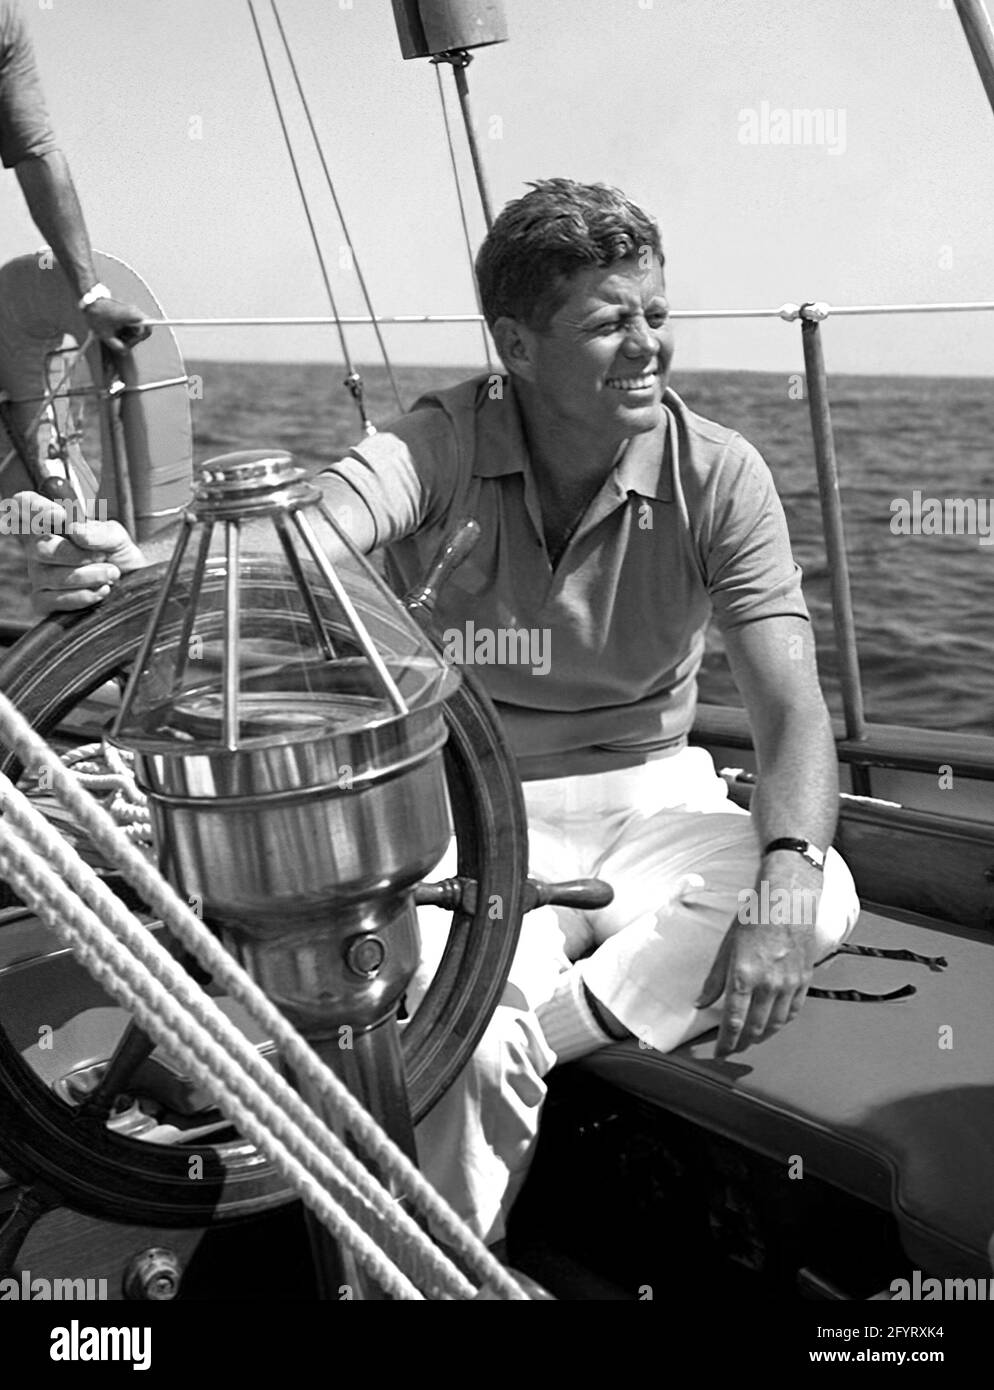 President John F. Kennedy sits aboard the United States Coast Guard boat Manitou in Narragansett Bay, Newport, Rhode Island. The President sailed on the yacht during his vacation at Hammersmith Farm in Newport. 26 August 1962. Stock Photo